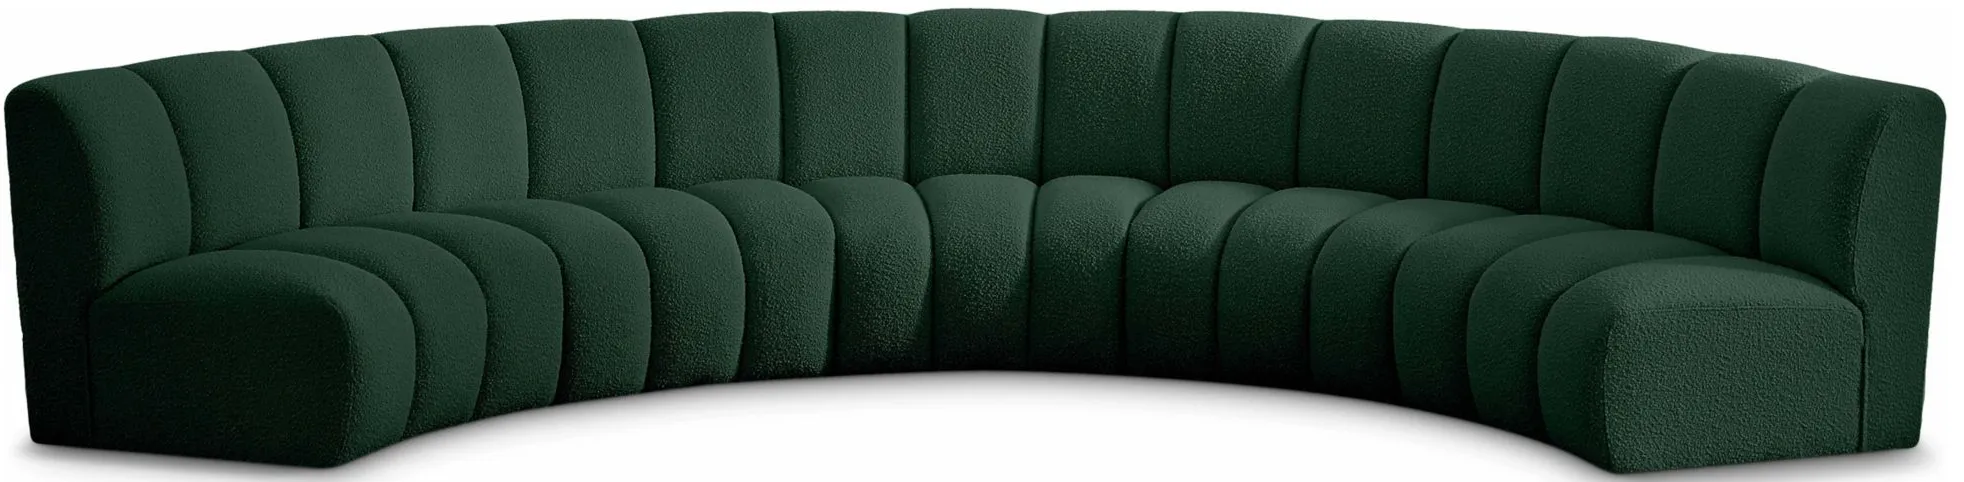 Infinity 5pc. Modular Sectional in Green by Meridian Furniture